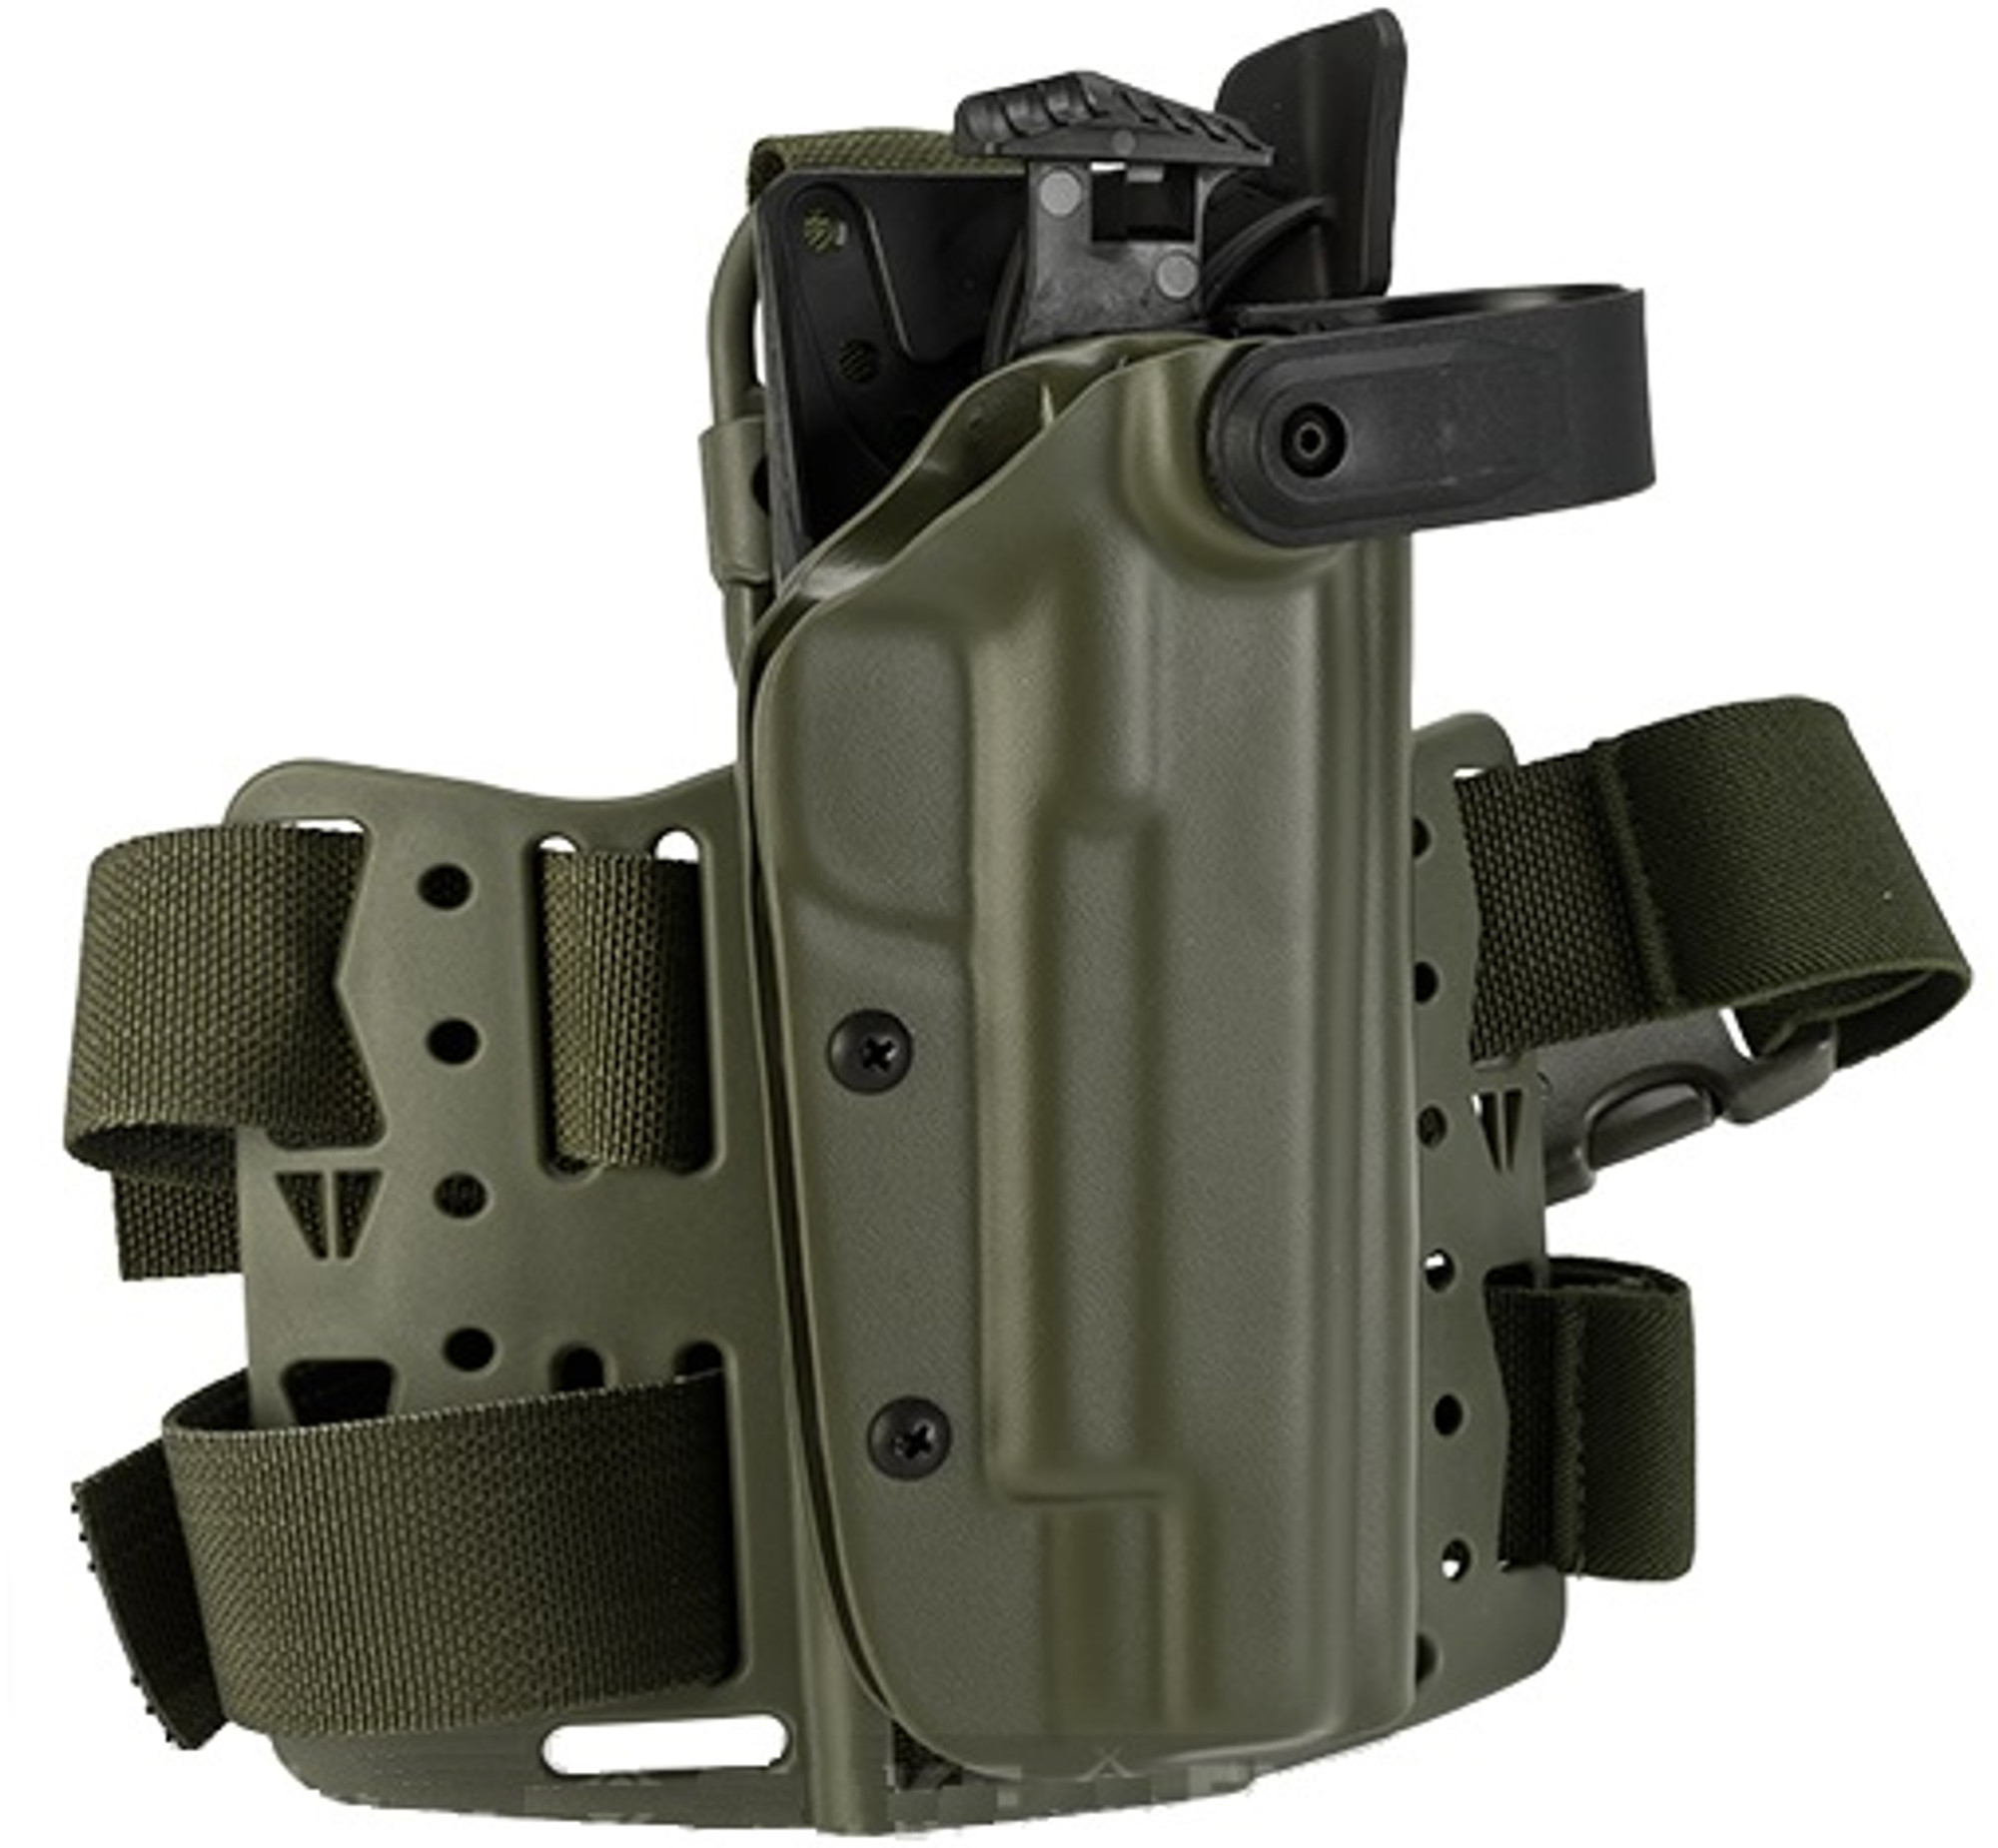 Blade-Tech WRS Level II Duty Holster w/Thigh Rig 1911 5" Right Hand - Olive Drab